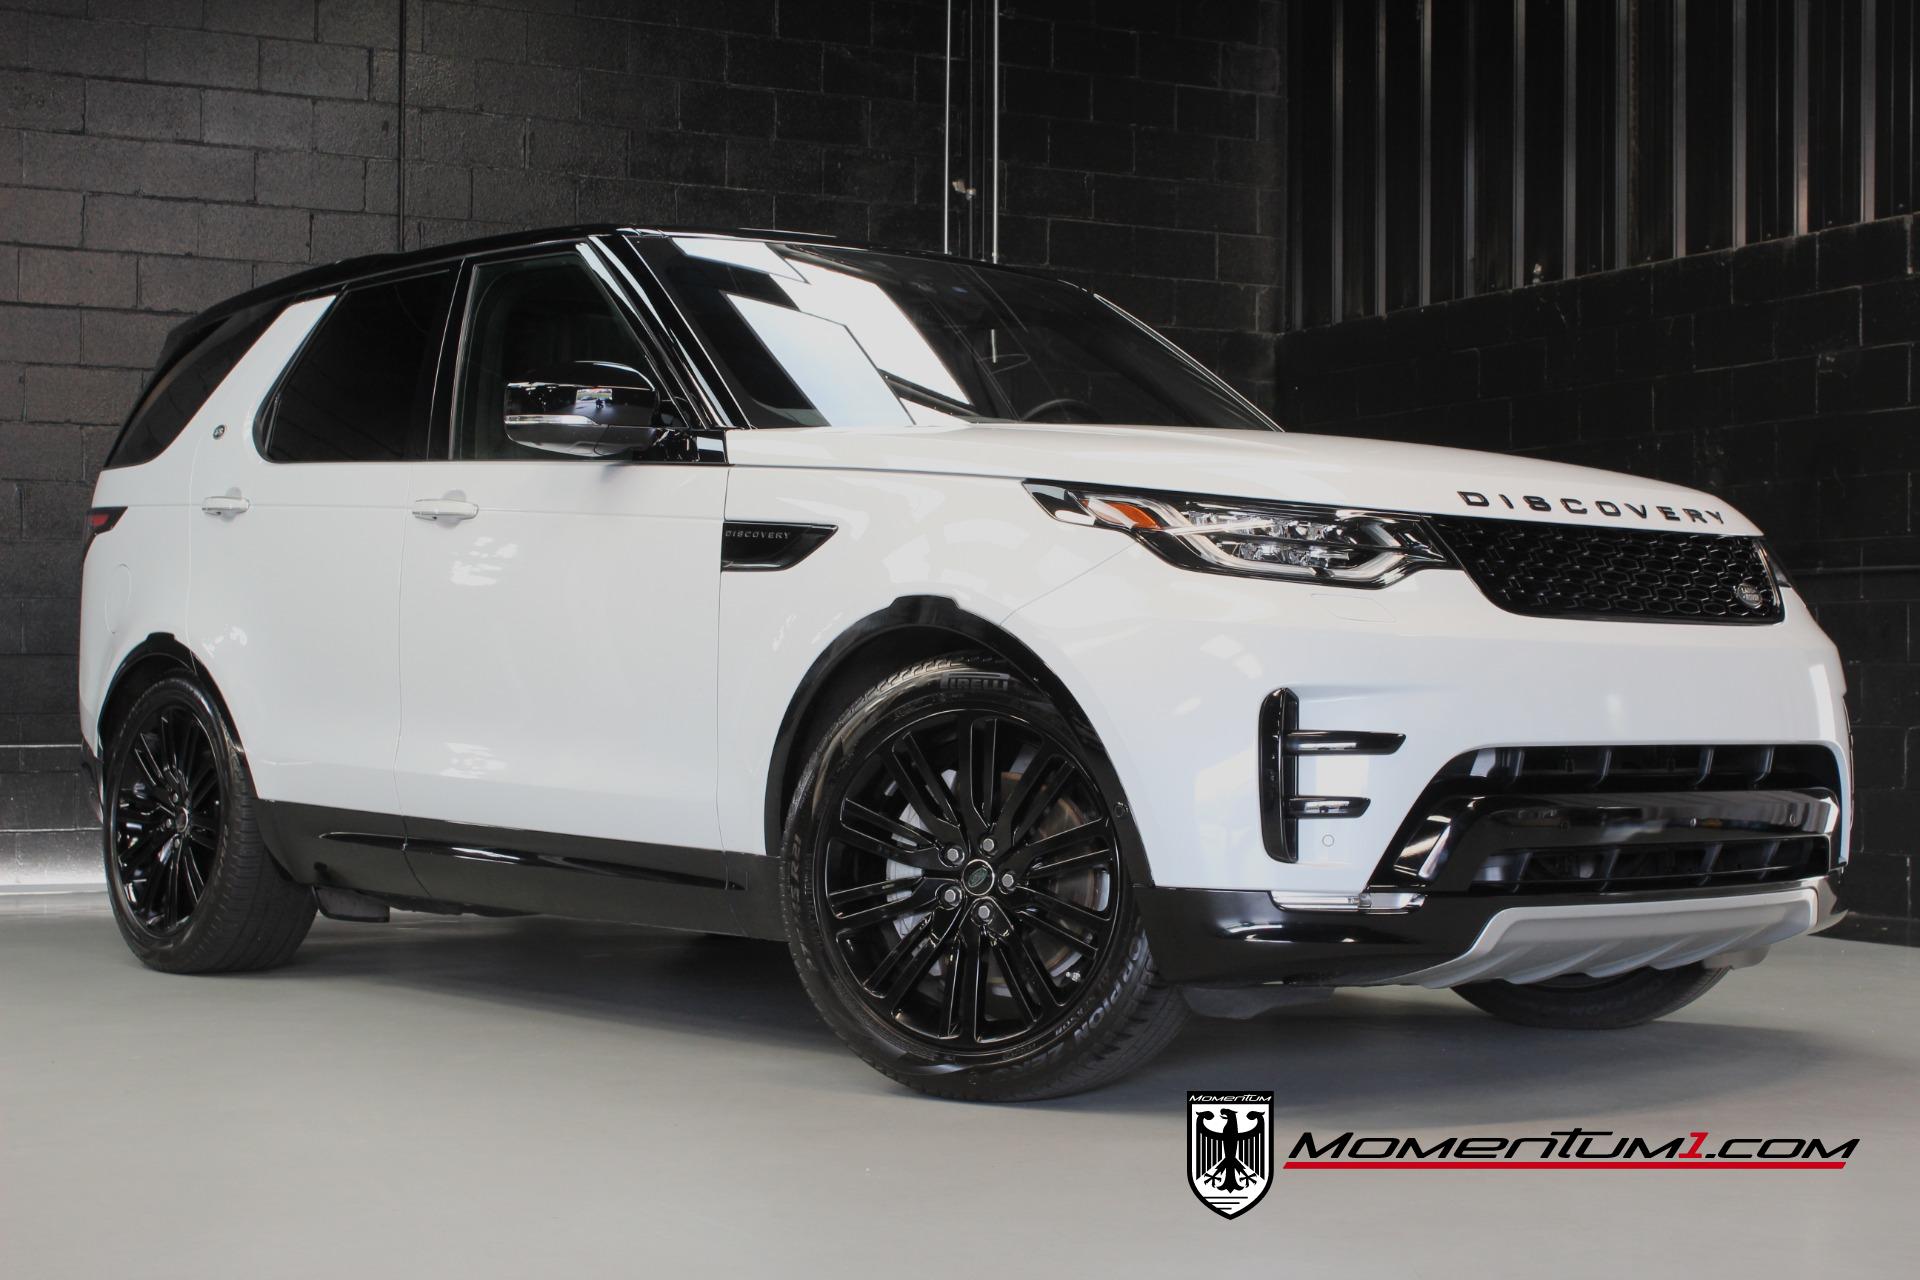 Used 2020 Land Rover Discovery HSE Luxury For Sale (Sold) | Momentum  Motorcars Inc Stock #426321